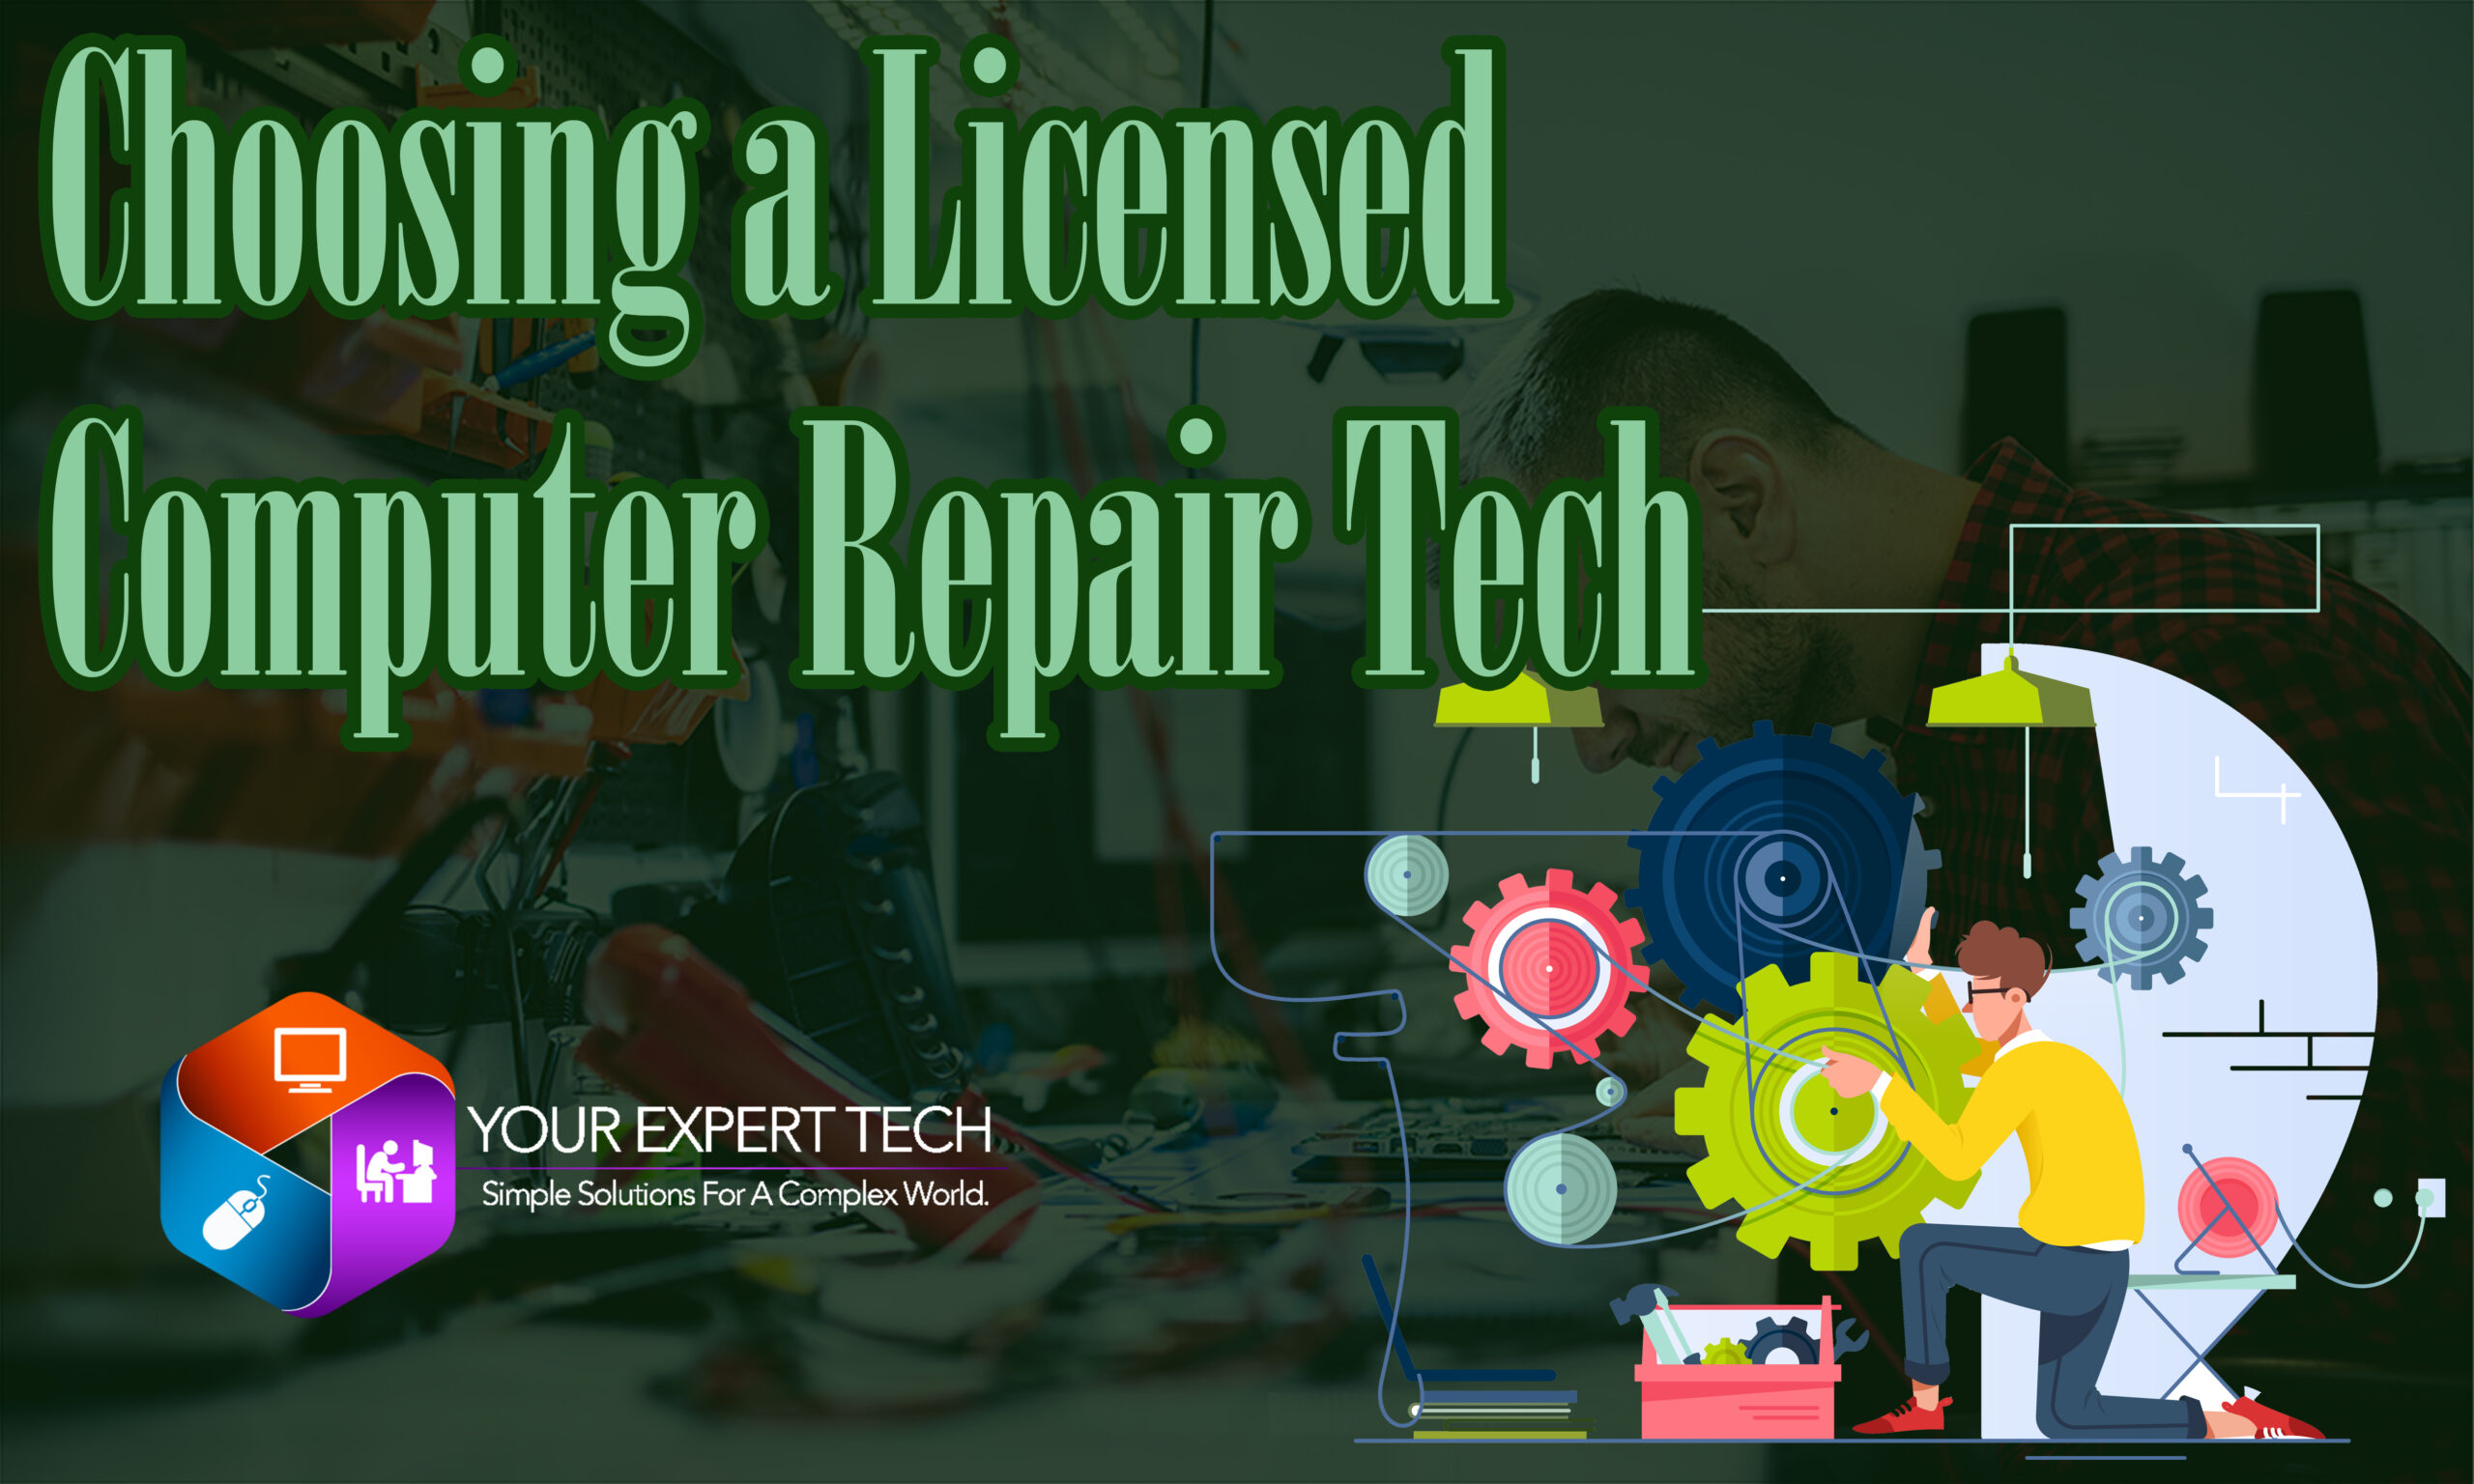 Title image for the blog post hiring a licensed computer repair tech